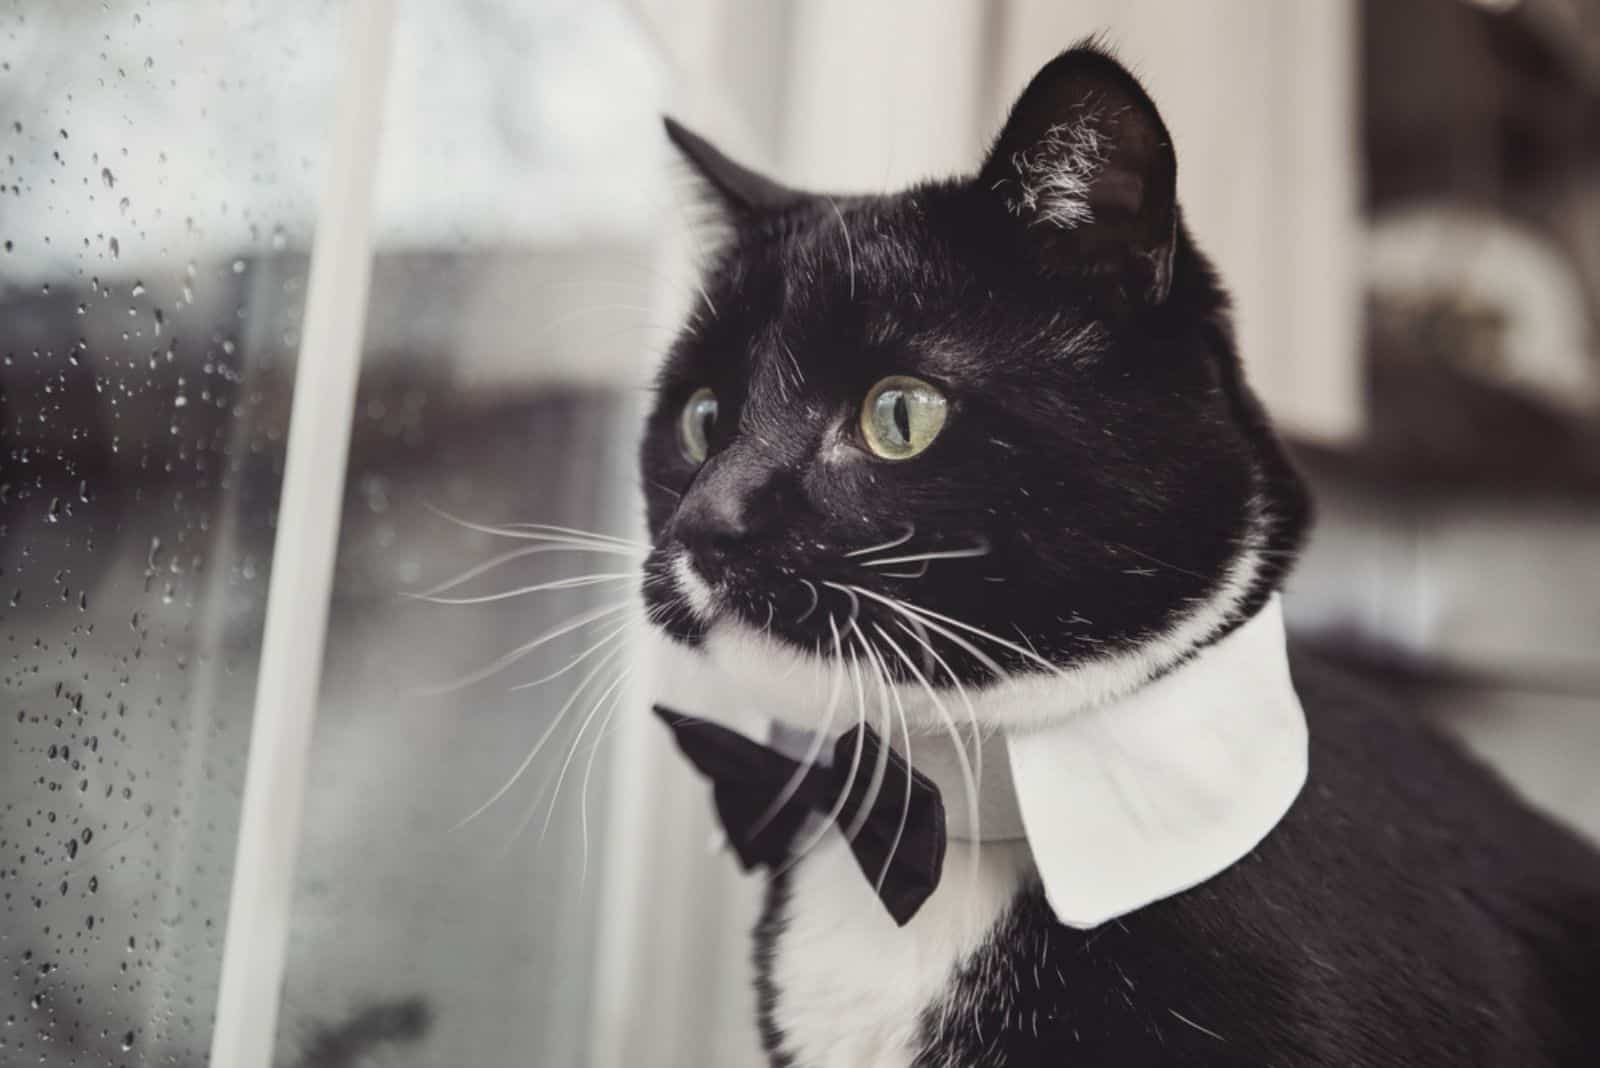 Black and White tuxedo cat wearing a bowtie looking out a window